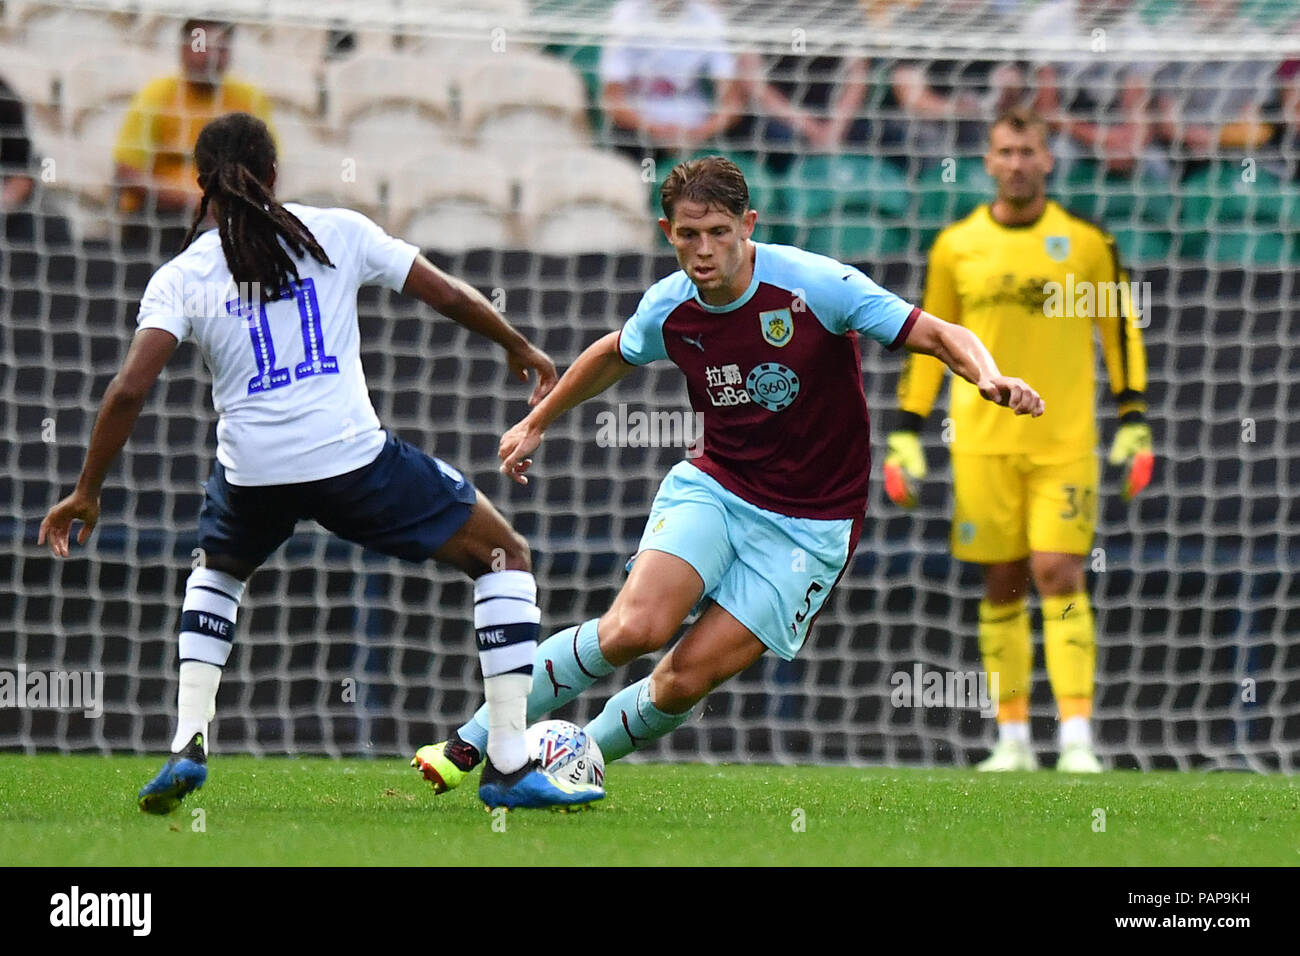 Burnley's James Tarkowski in action during a pre season friendly match at Deepdale, Preston. PRESS ASSOCIATION Photo. Picture date: Monday July 23, 2018. Photo credit should read: Antony Devlin/PA Wire. No use with unauthorised audio, video, data, fixture lists, club/league logos or 'live' services. Online in-match use limited to 75 images, no video emulation. No use in betting, games or single club/league/player publications. Stock Photo